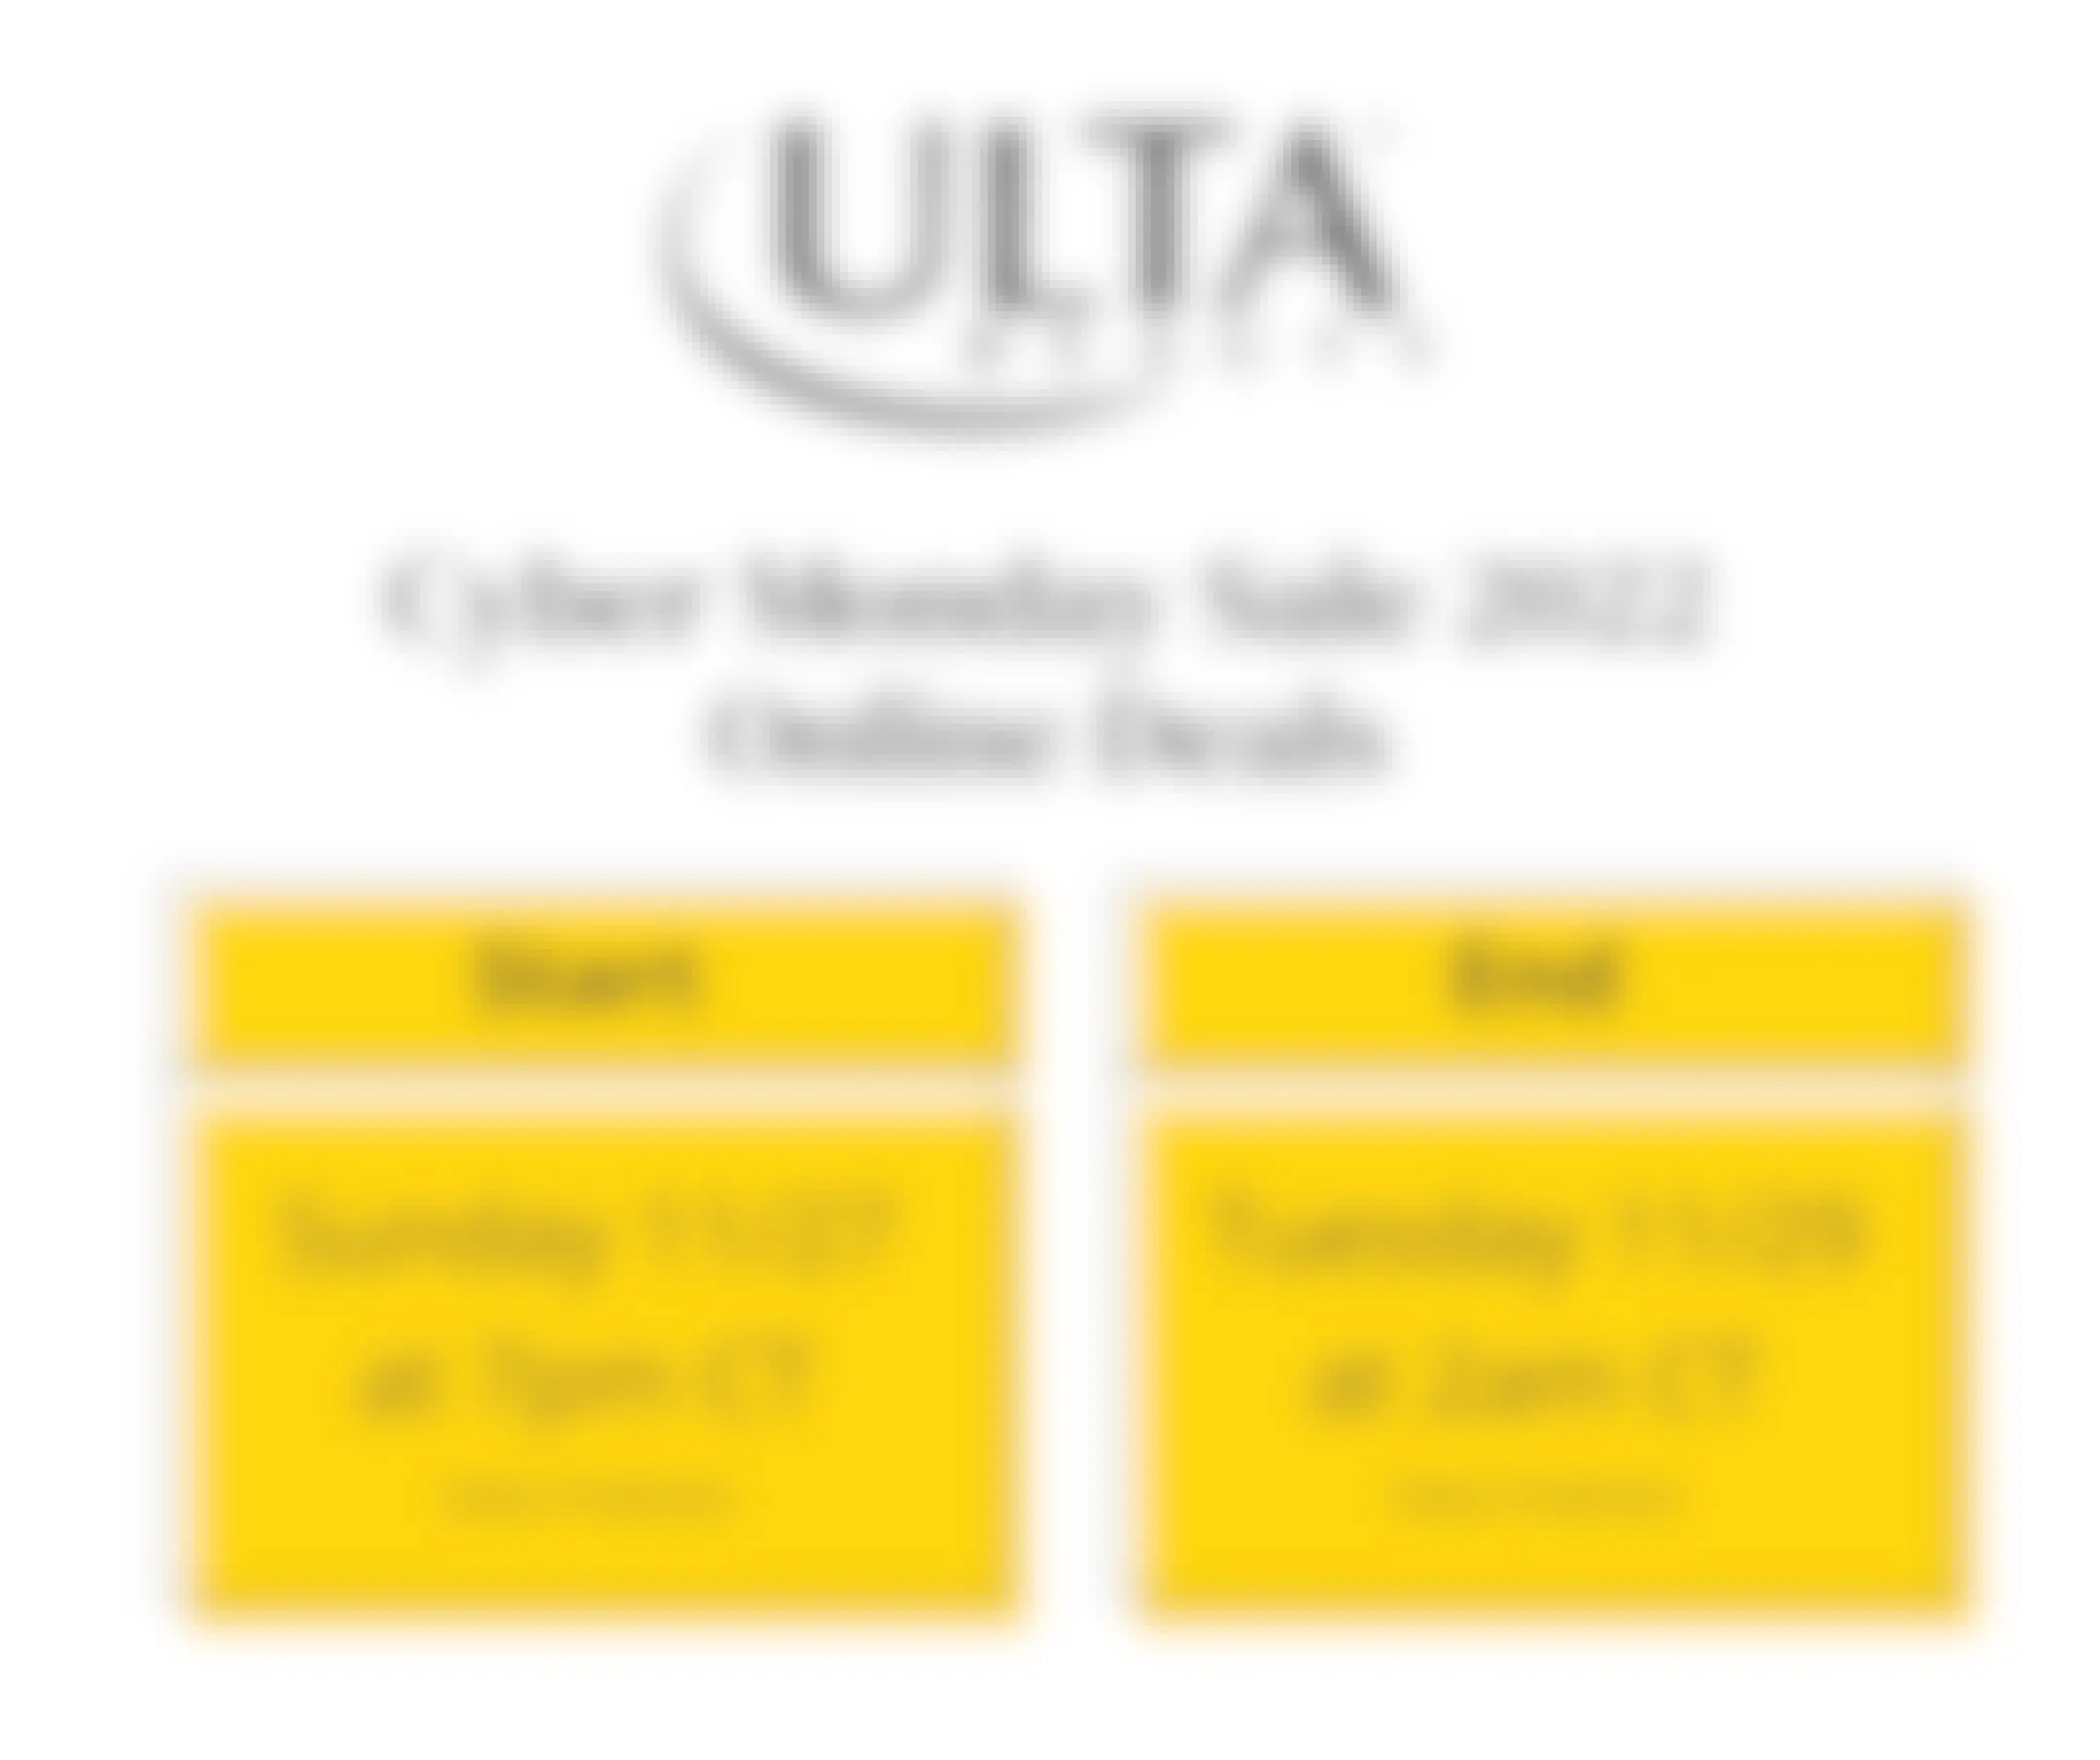 The start and end dates for the Ulta Cyber Monday sale